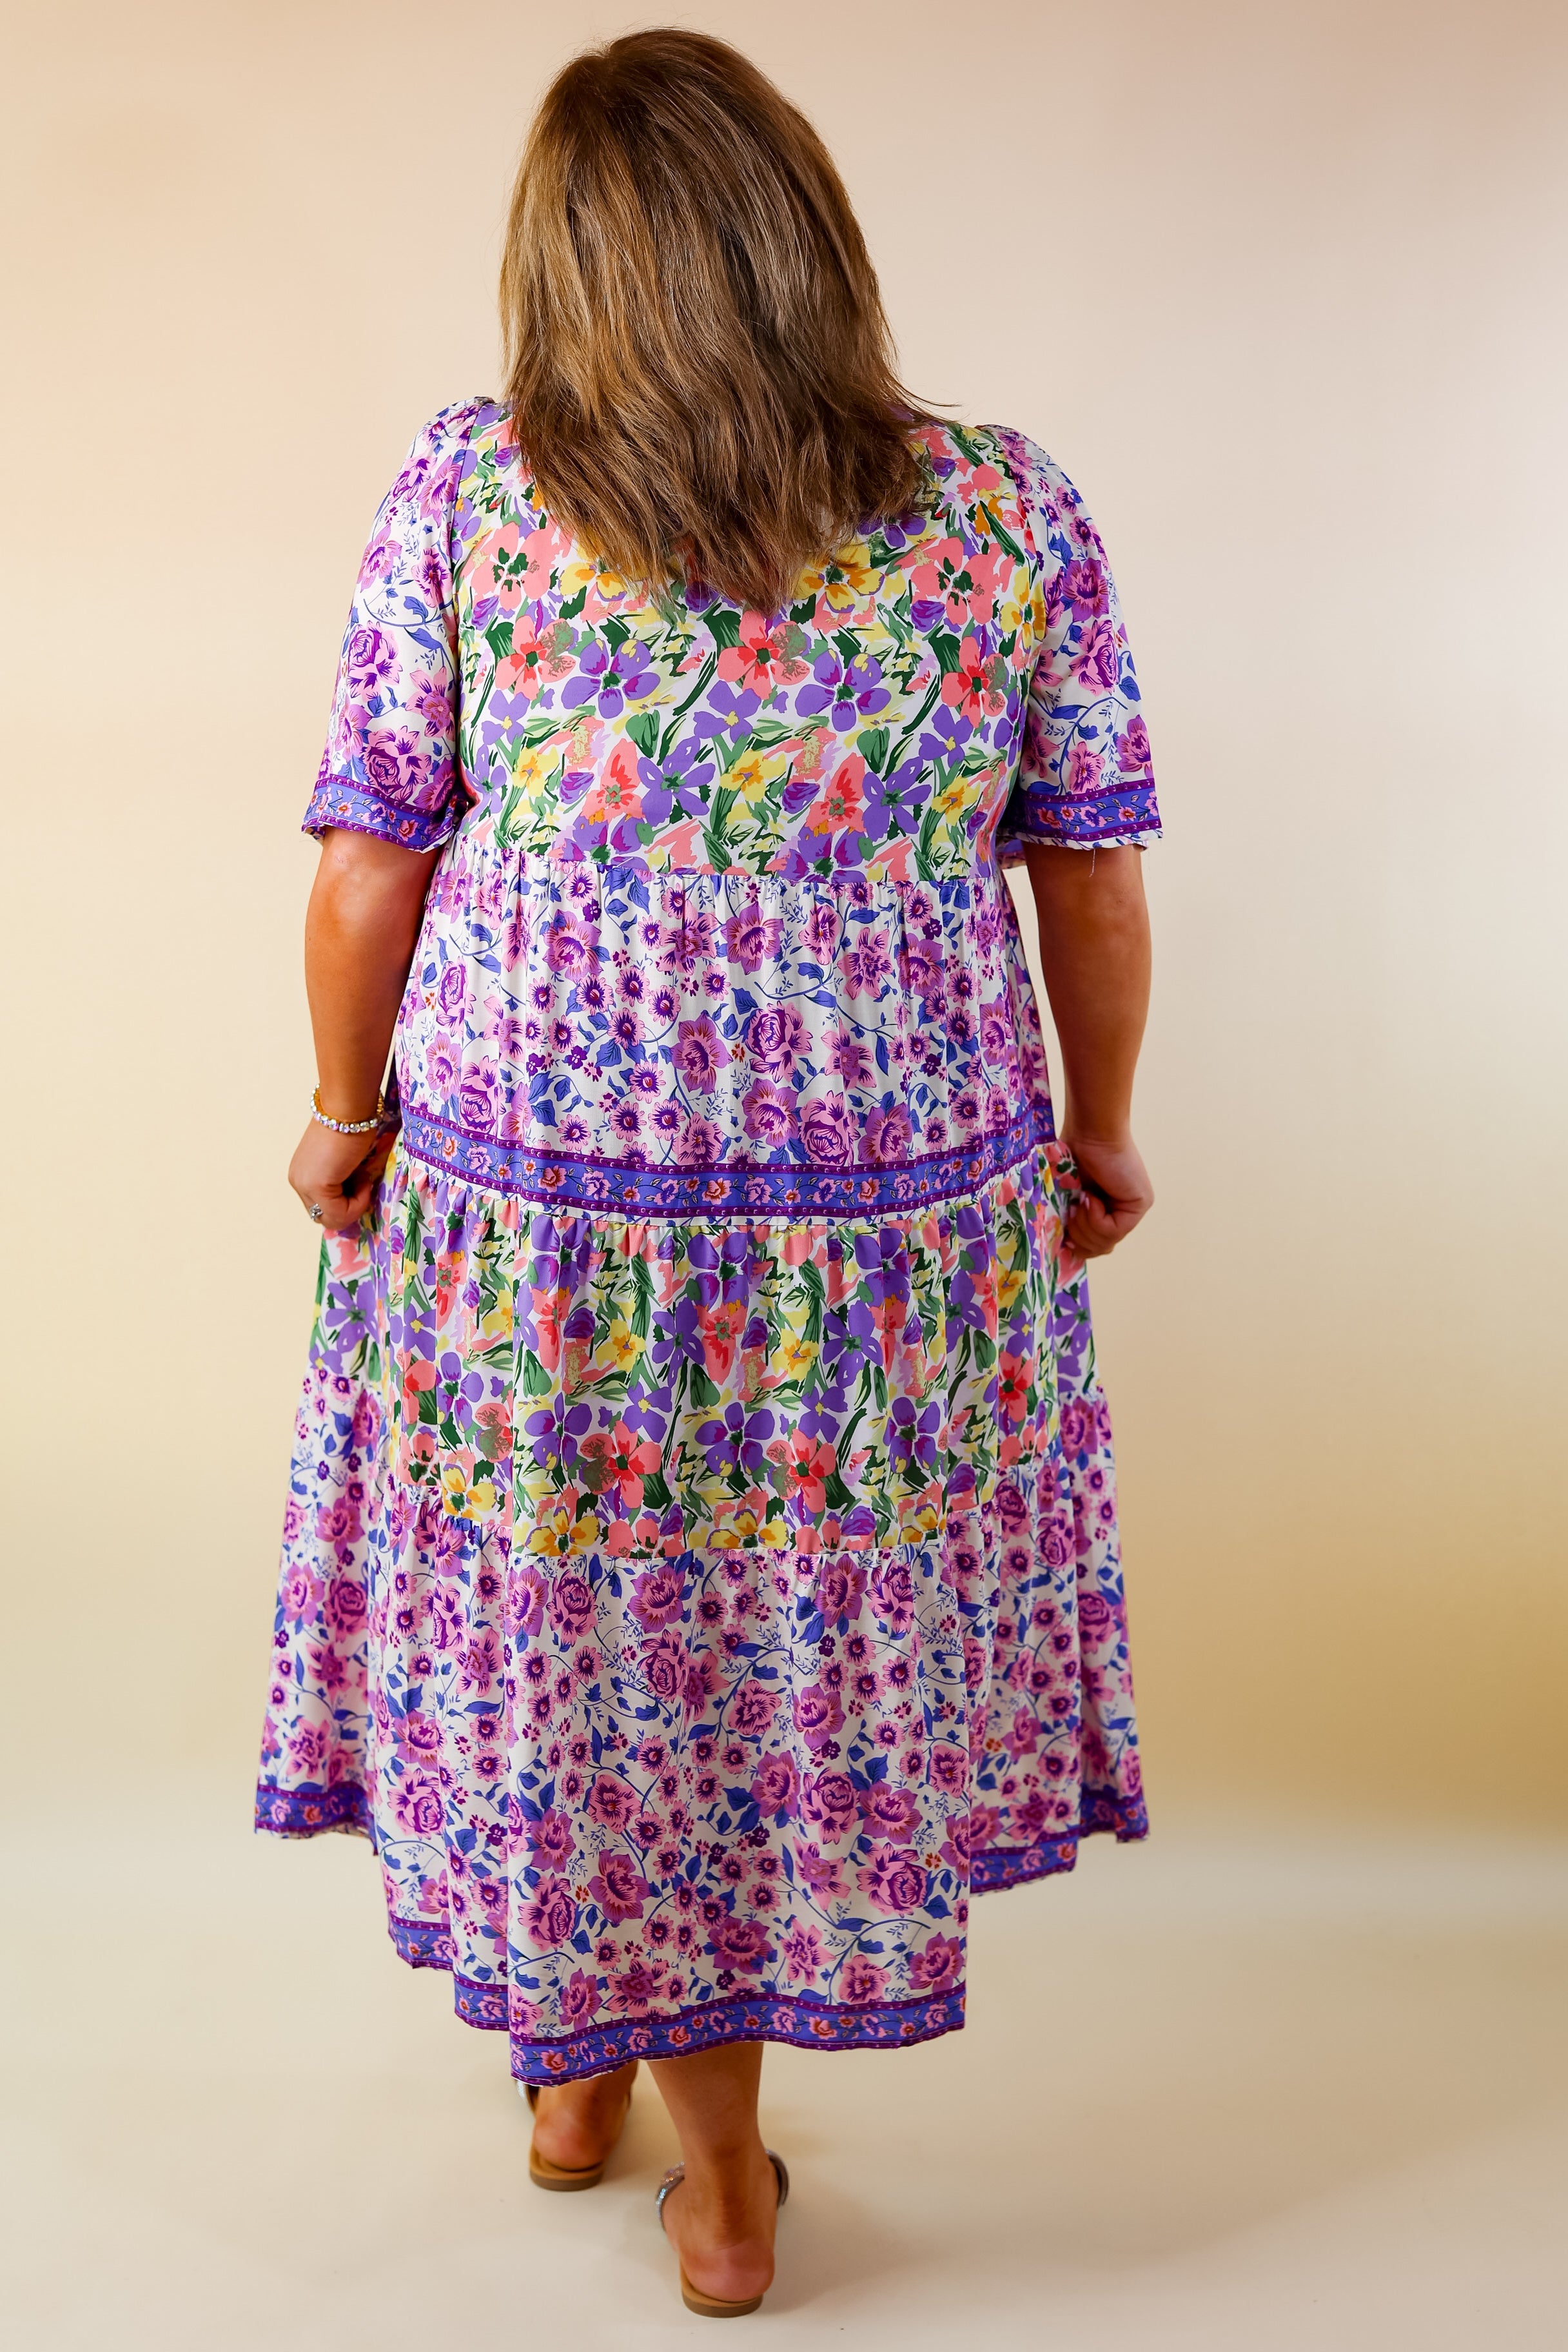 Tulip Fields Floral Tiered Midi Dress in Violet Purple Mix - Giddy Up Glamour Boutique